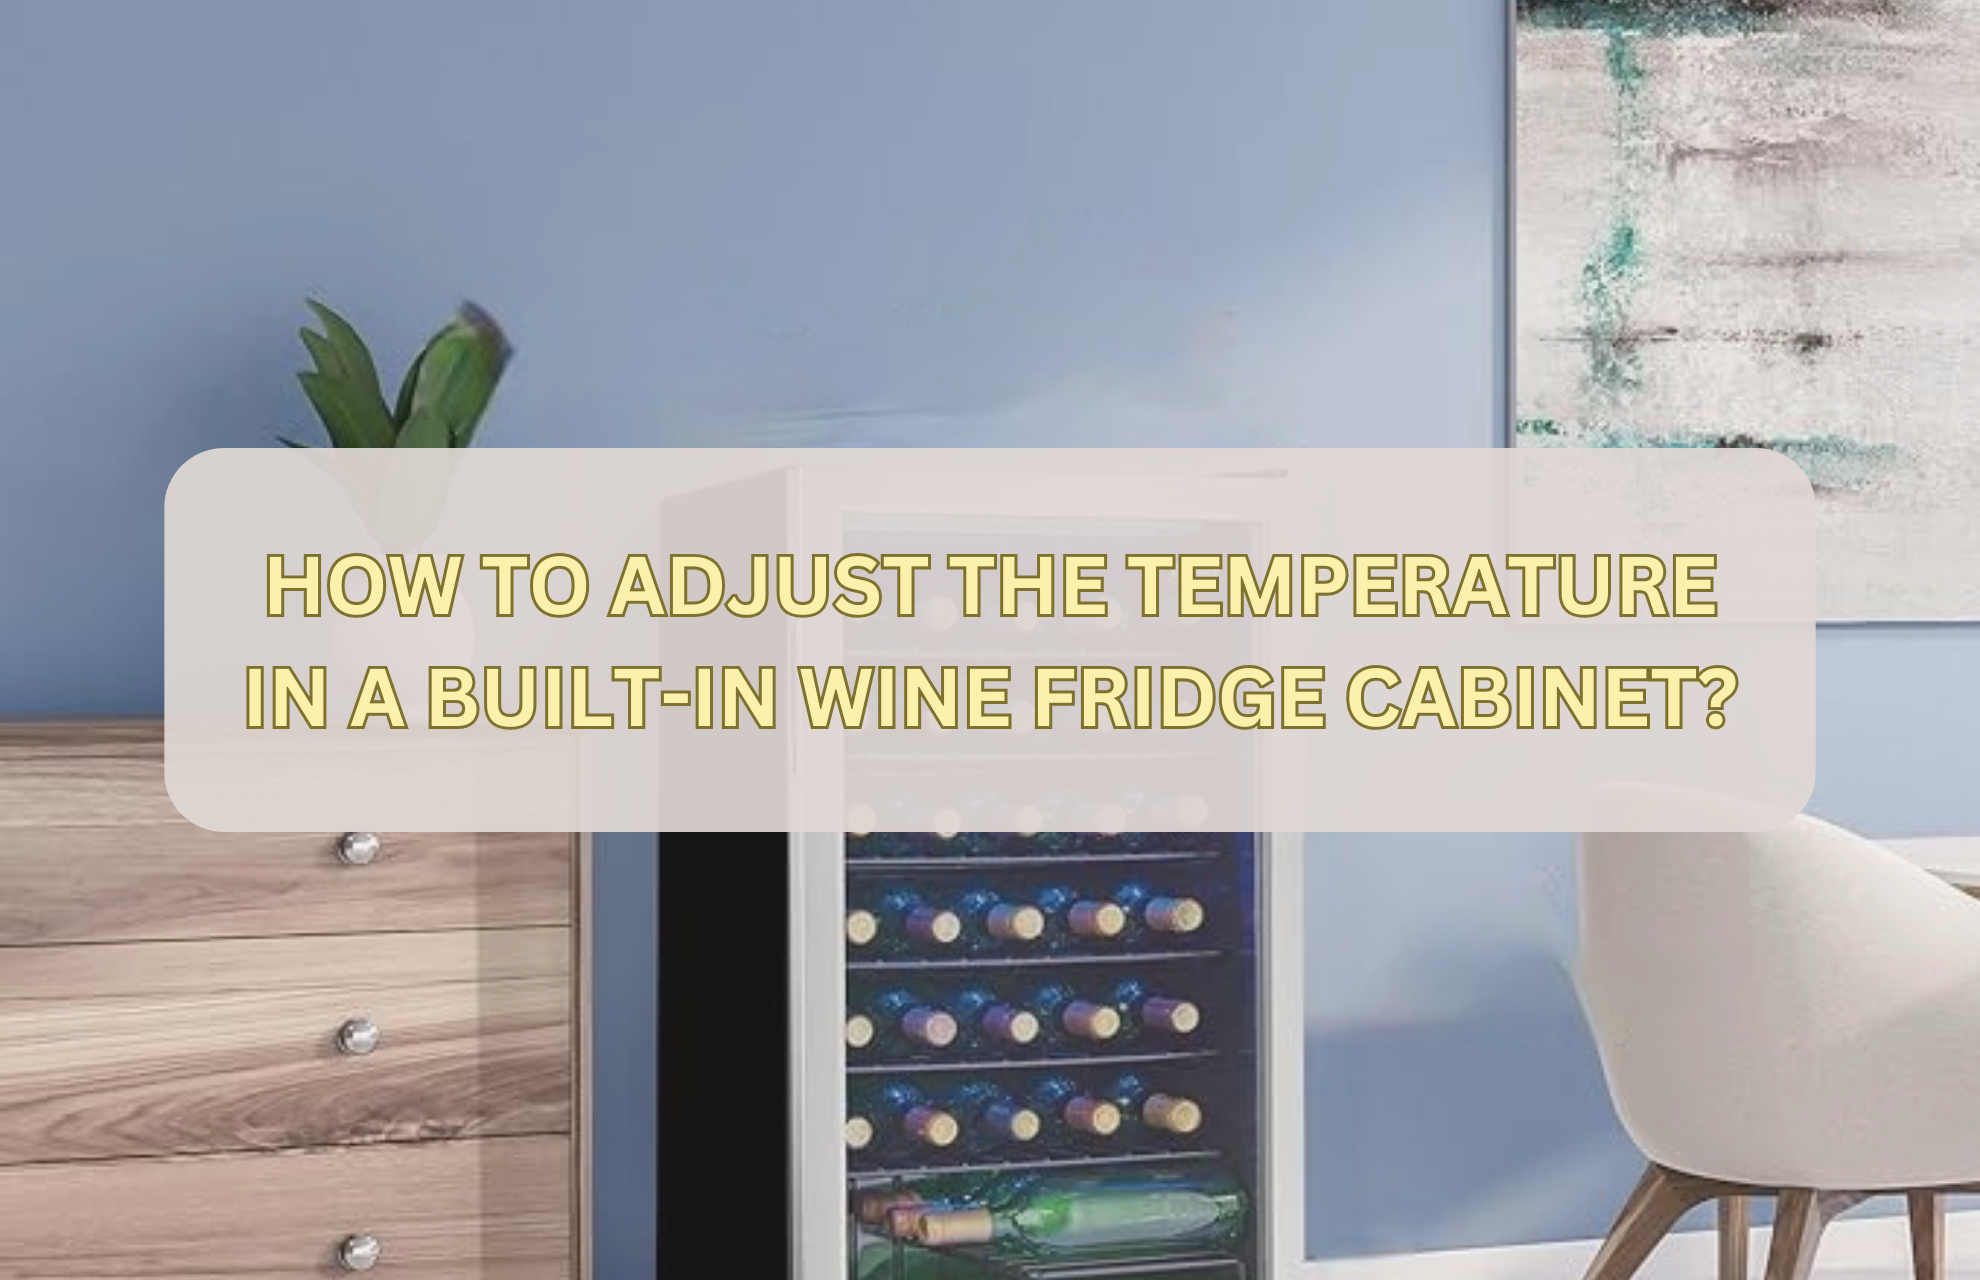 HOW TO ADJUST THE TEMPERATURE IN A BUILT-IN WINE FRIDGE CABINET